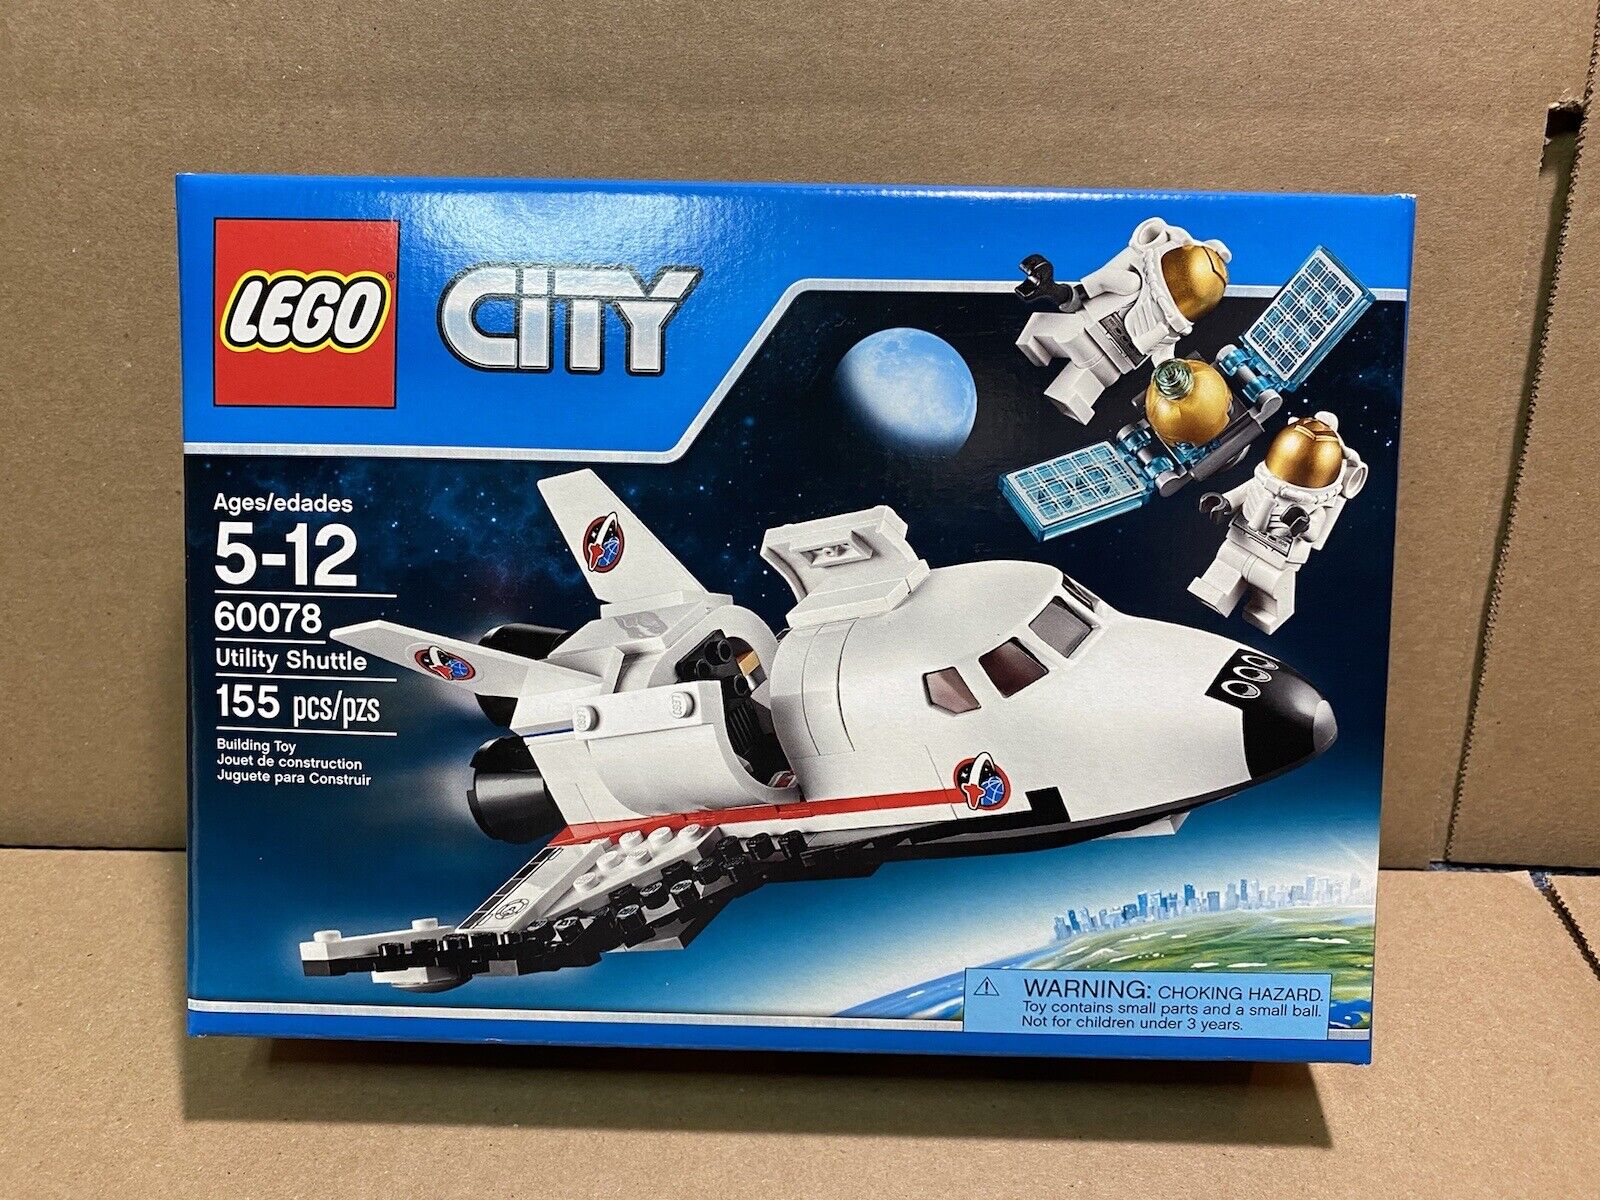 LEGO CITY 60078 Utility Space Shuttle NISB NEW IN FACTORY SEALED BOX RETIRED